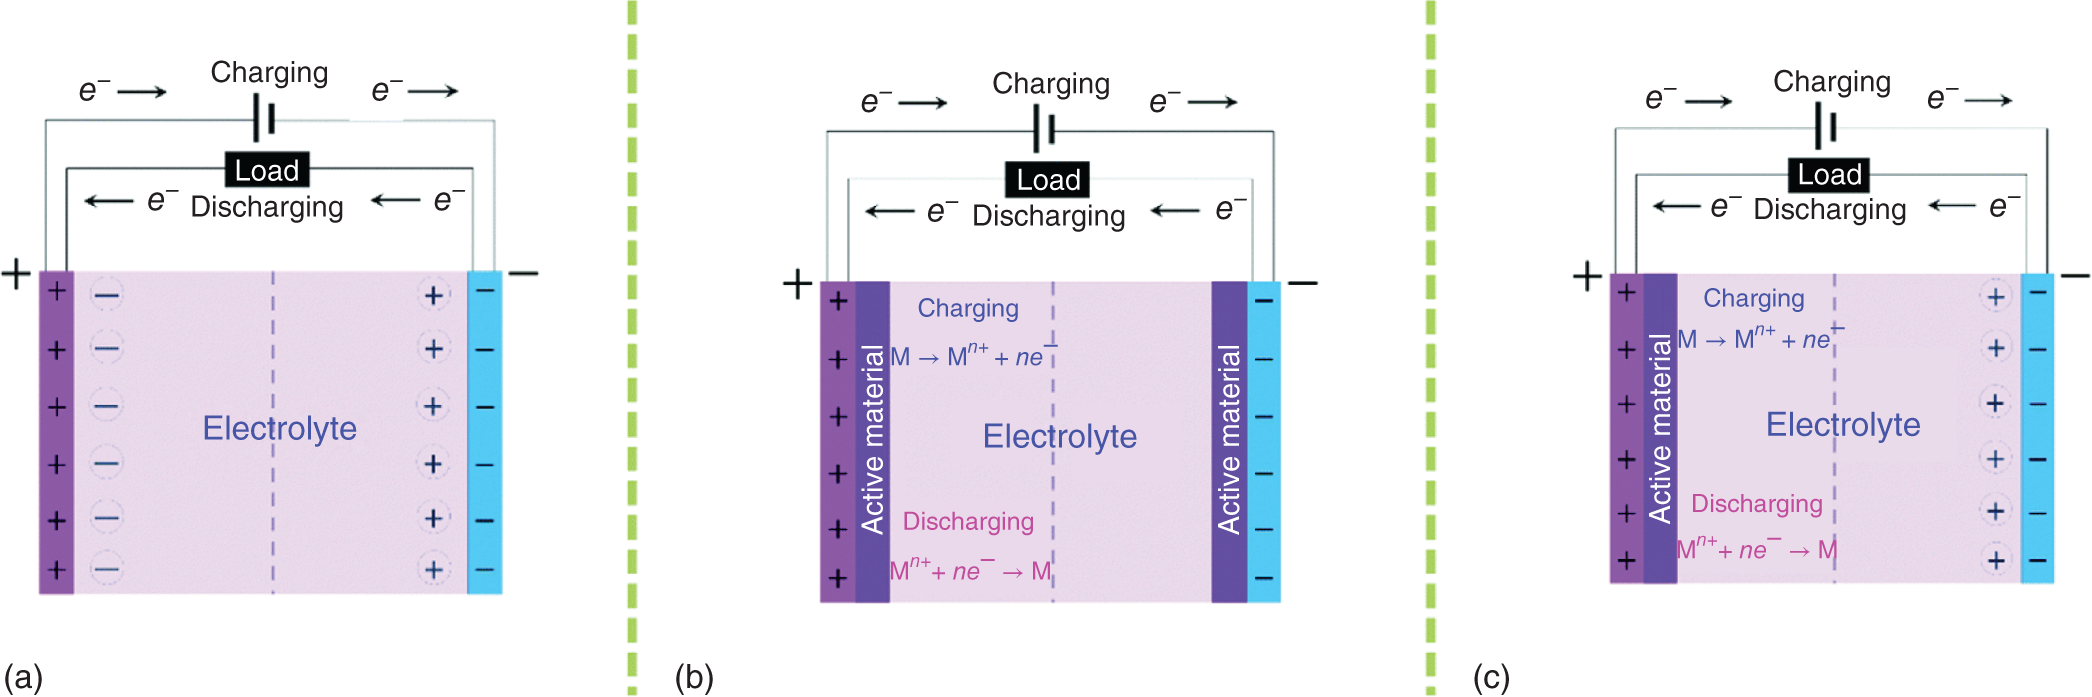 Schematic illustration of the types of supercapacitors and their charge storage mechanism. (a) EDLC, (b) pseudocapacitor, and (c) hybrid supercapacitor.